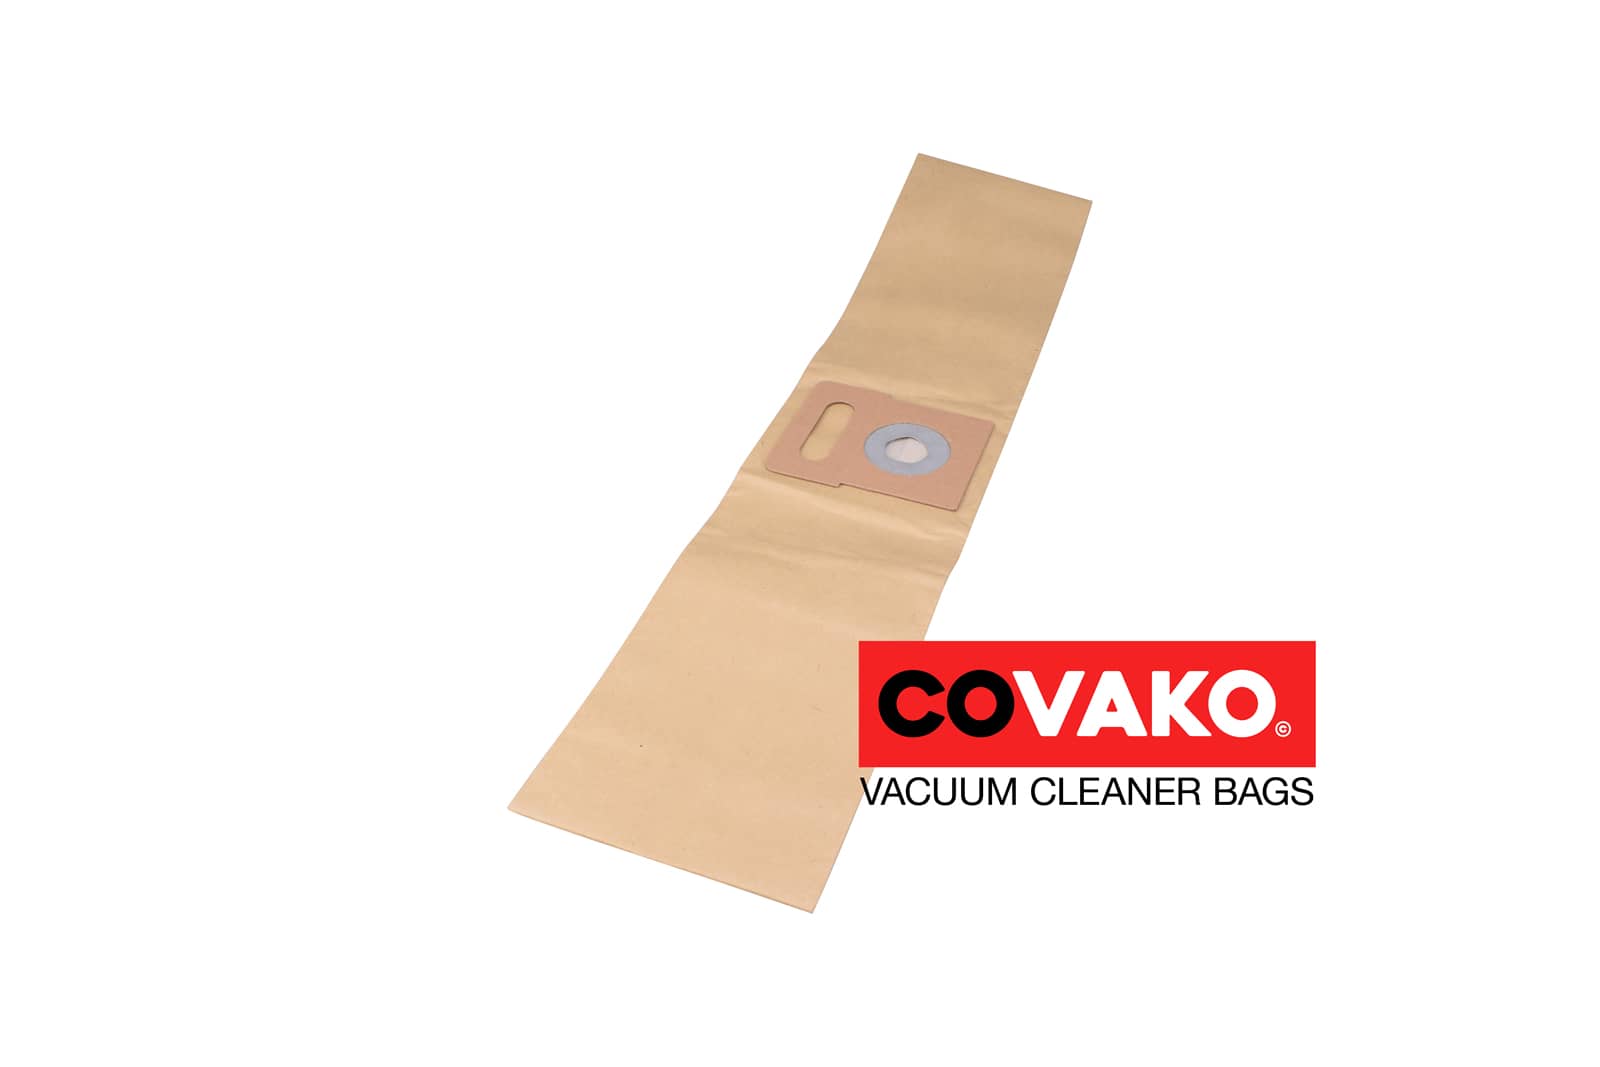 Oehme Otto 643533 / Paper - Oehme Otto vacuum cleaner bags